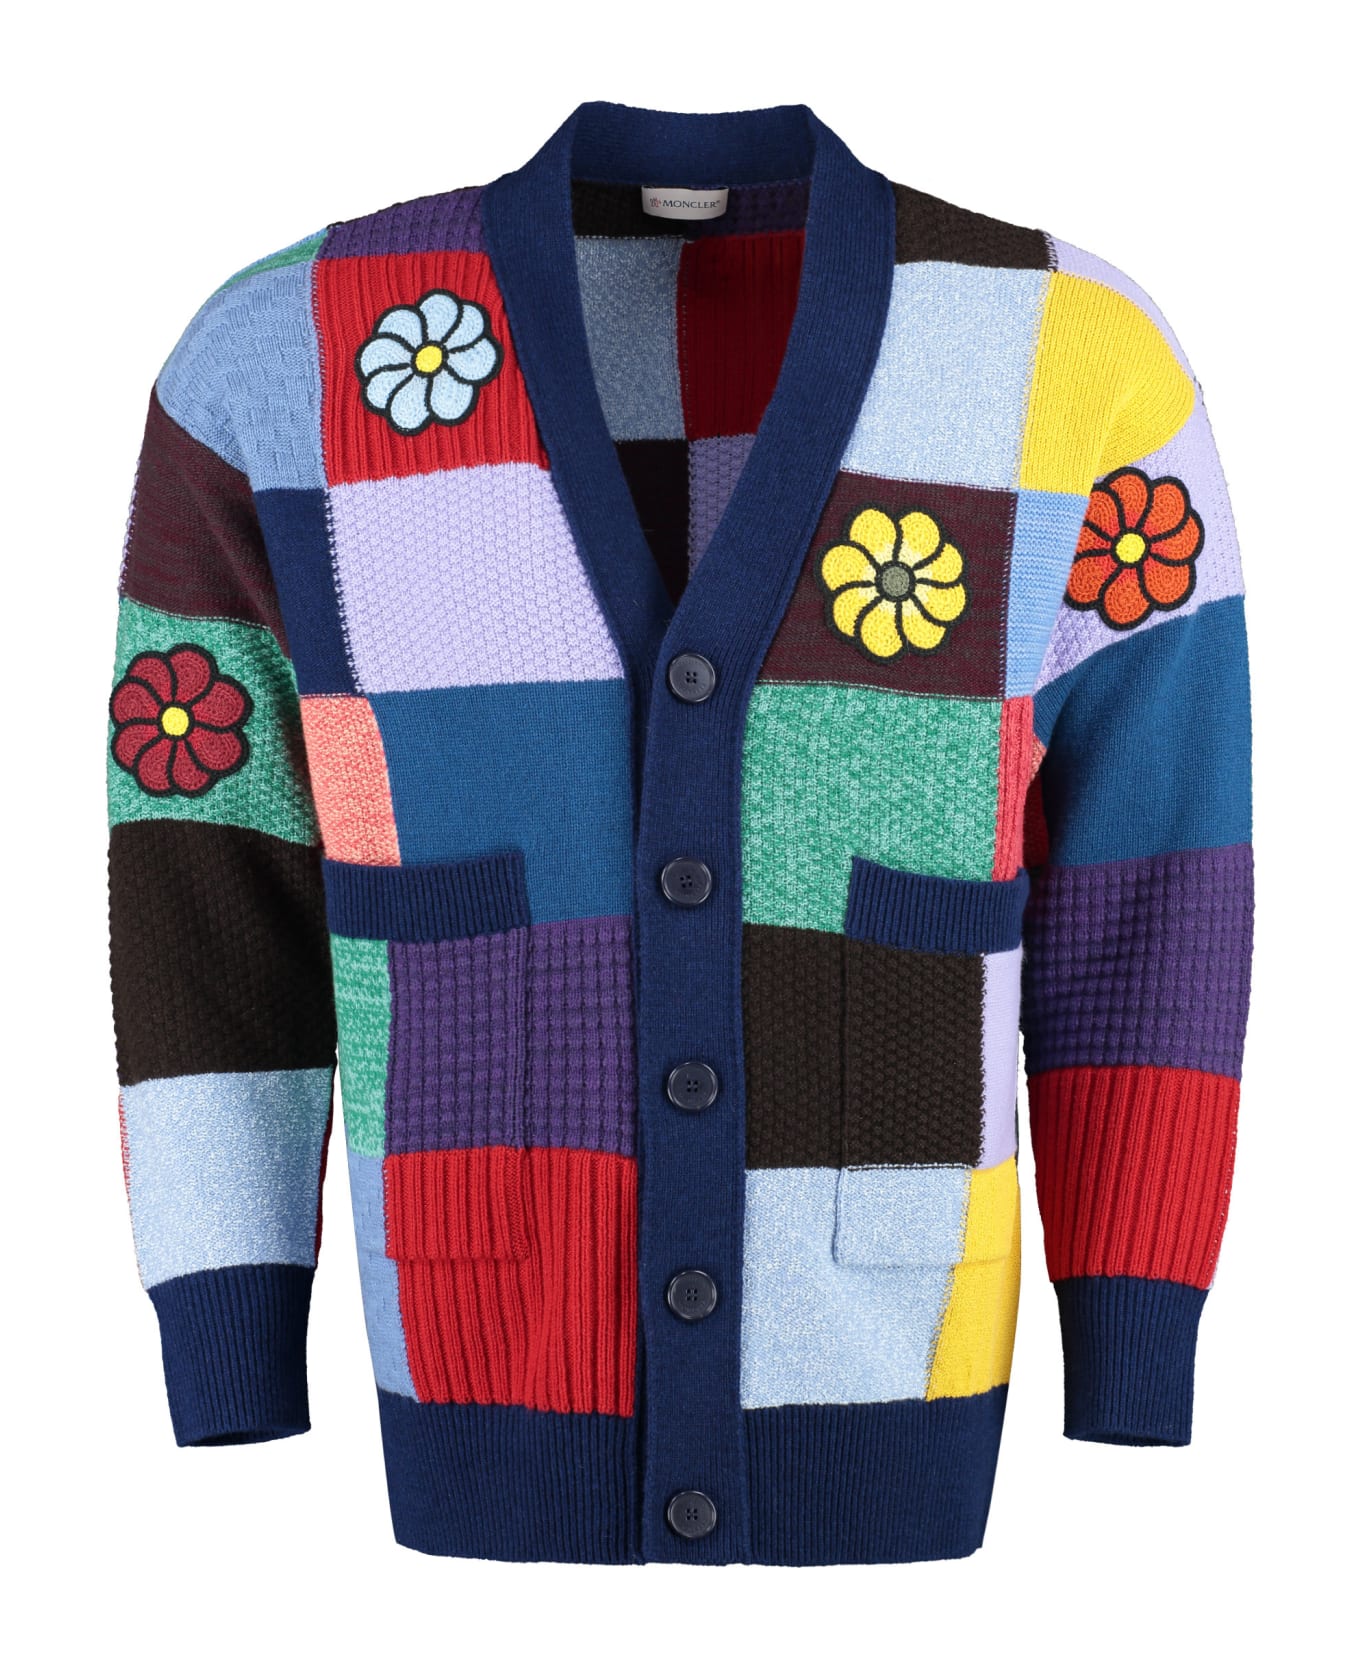 Moncler Genius 1 Moncler Jw Anderson - Wool And Cashmere Cardigan - Multicolor カーディガン